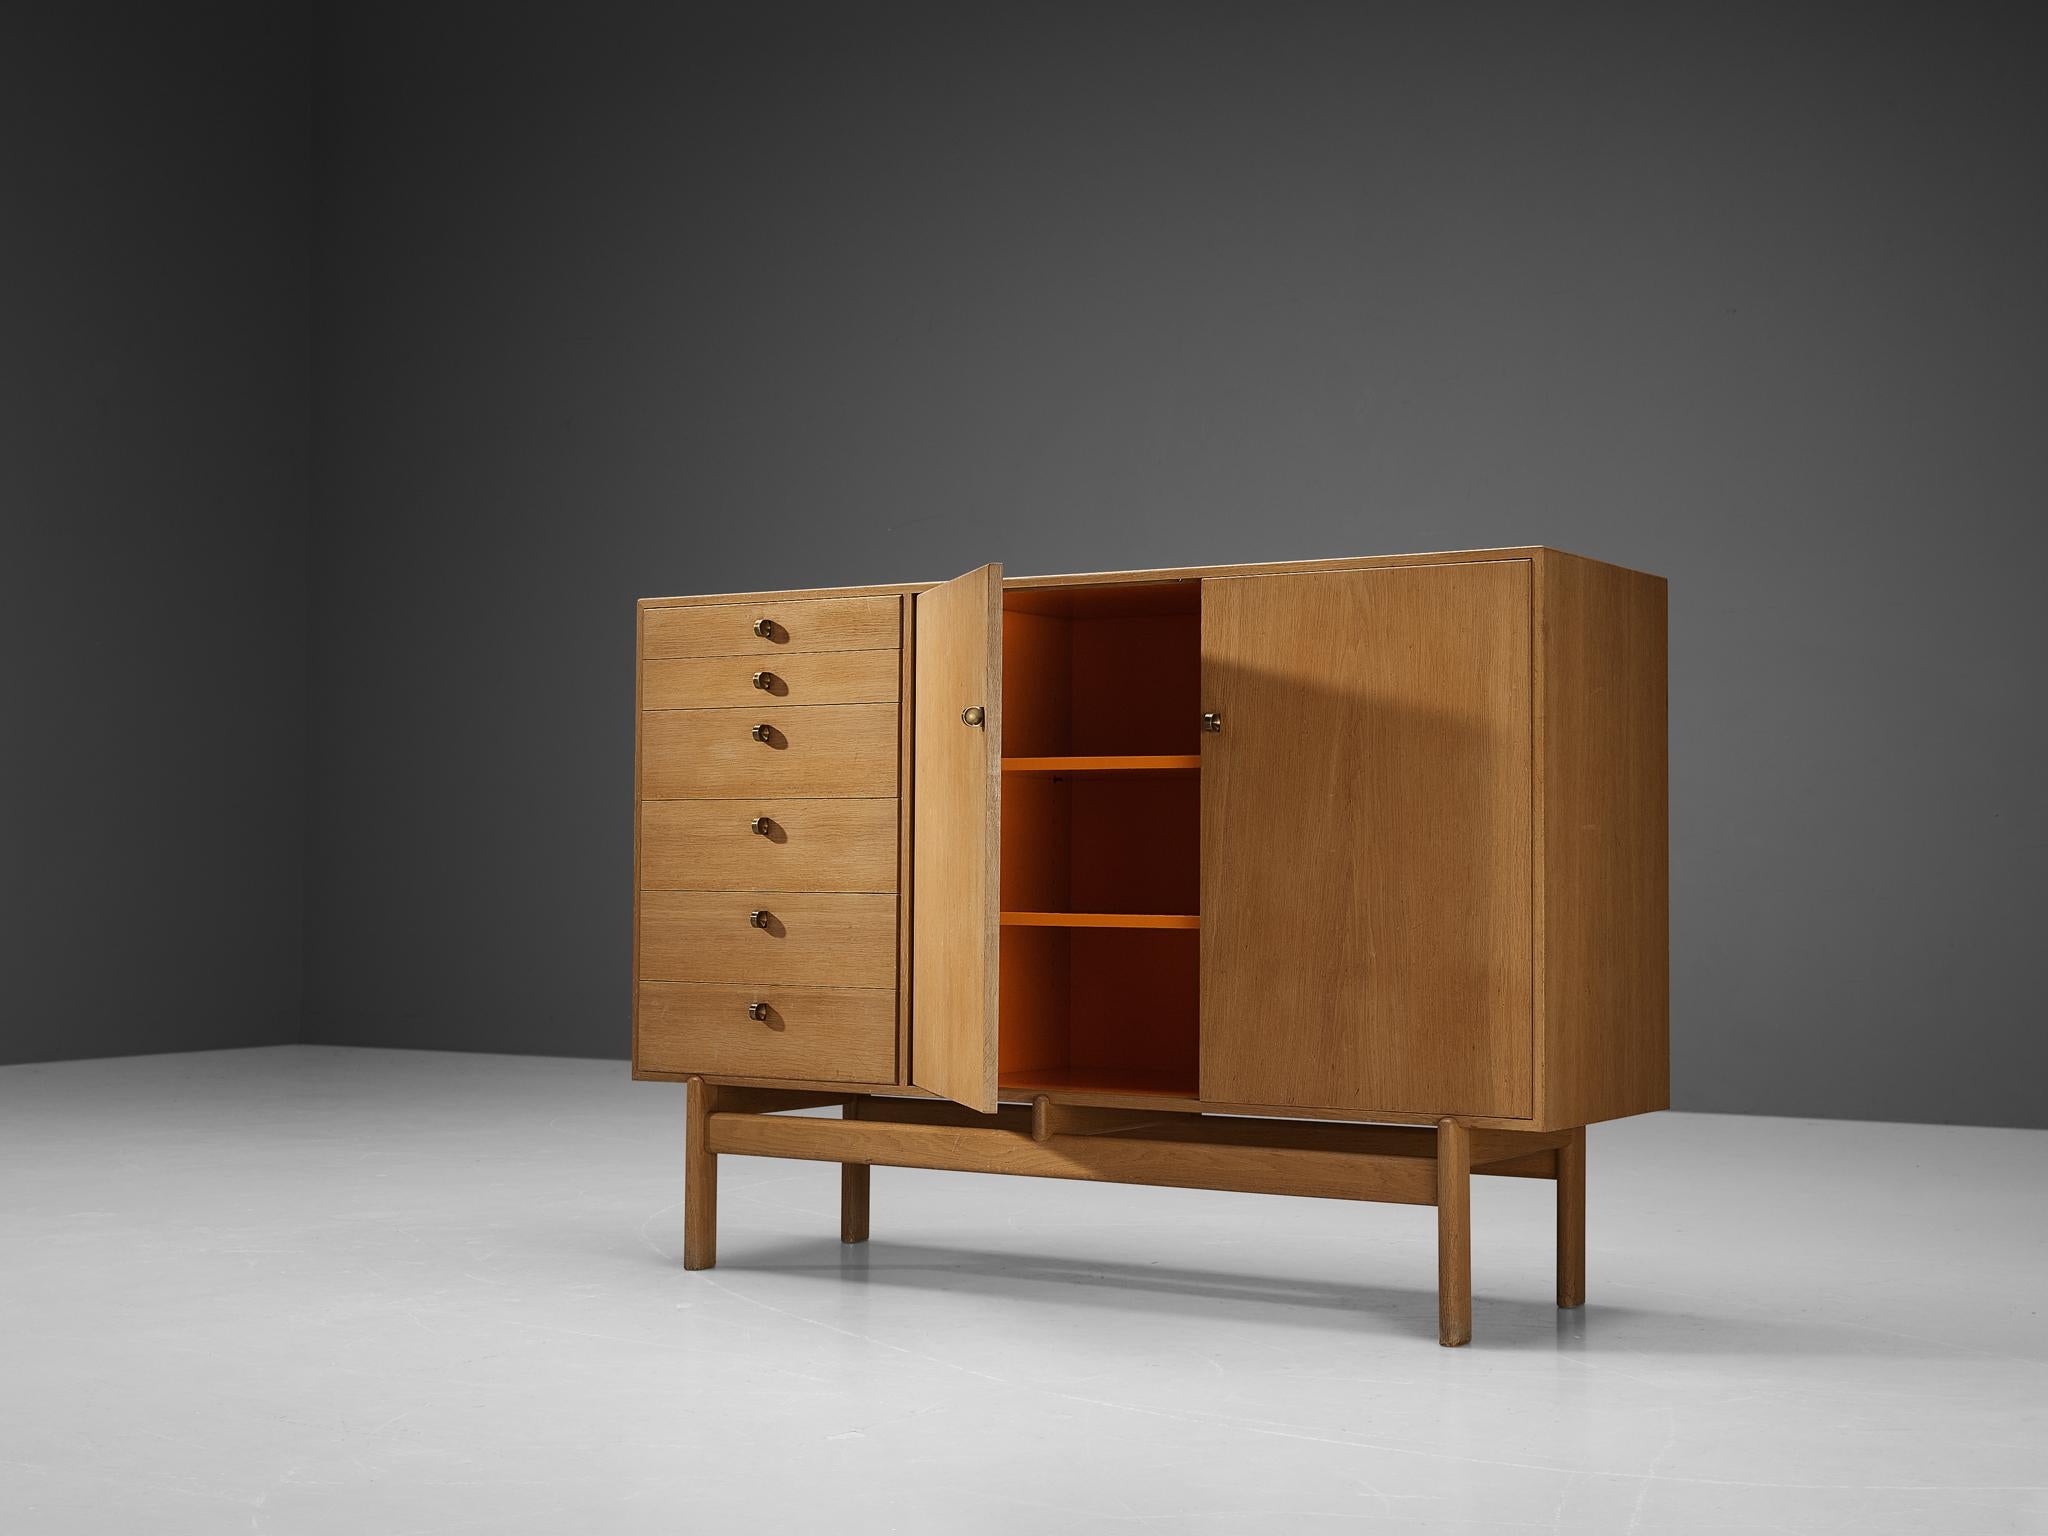 Tove and Edvard Kindt-Larsen for Seffle Möbelfabrik, cabinet with drawers, oak, brass, Denmark, design 1961

Danish designer couple Tove and Edvard Kindt-Larsen designed this cabinet with drawers in 1961. It has a well-structured front with a